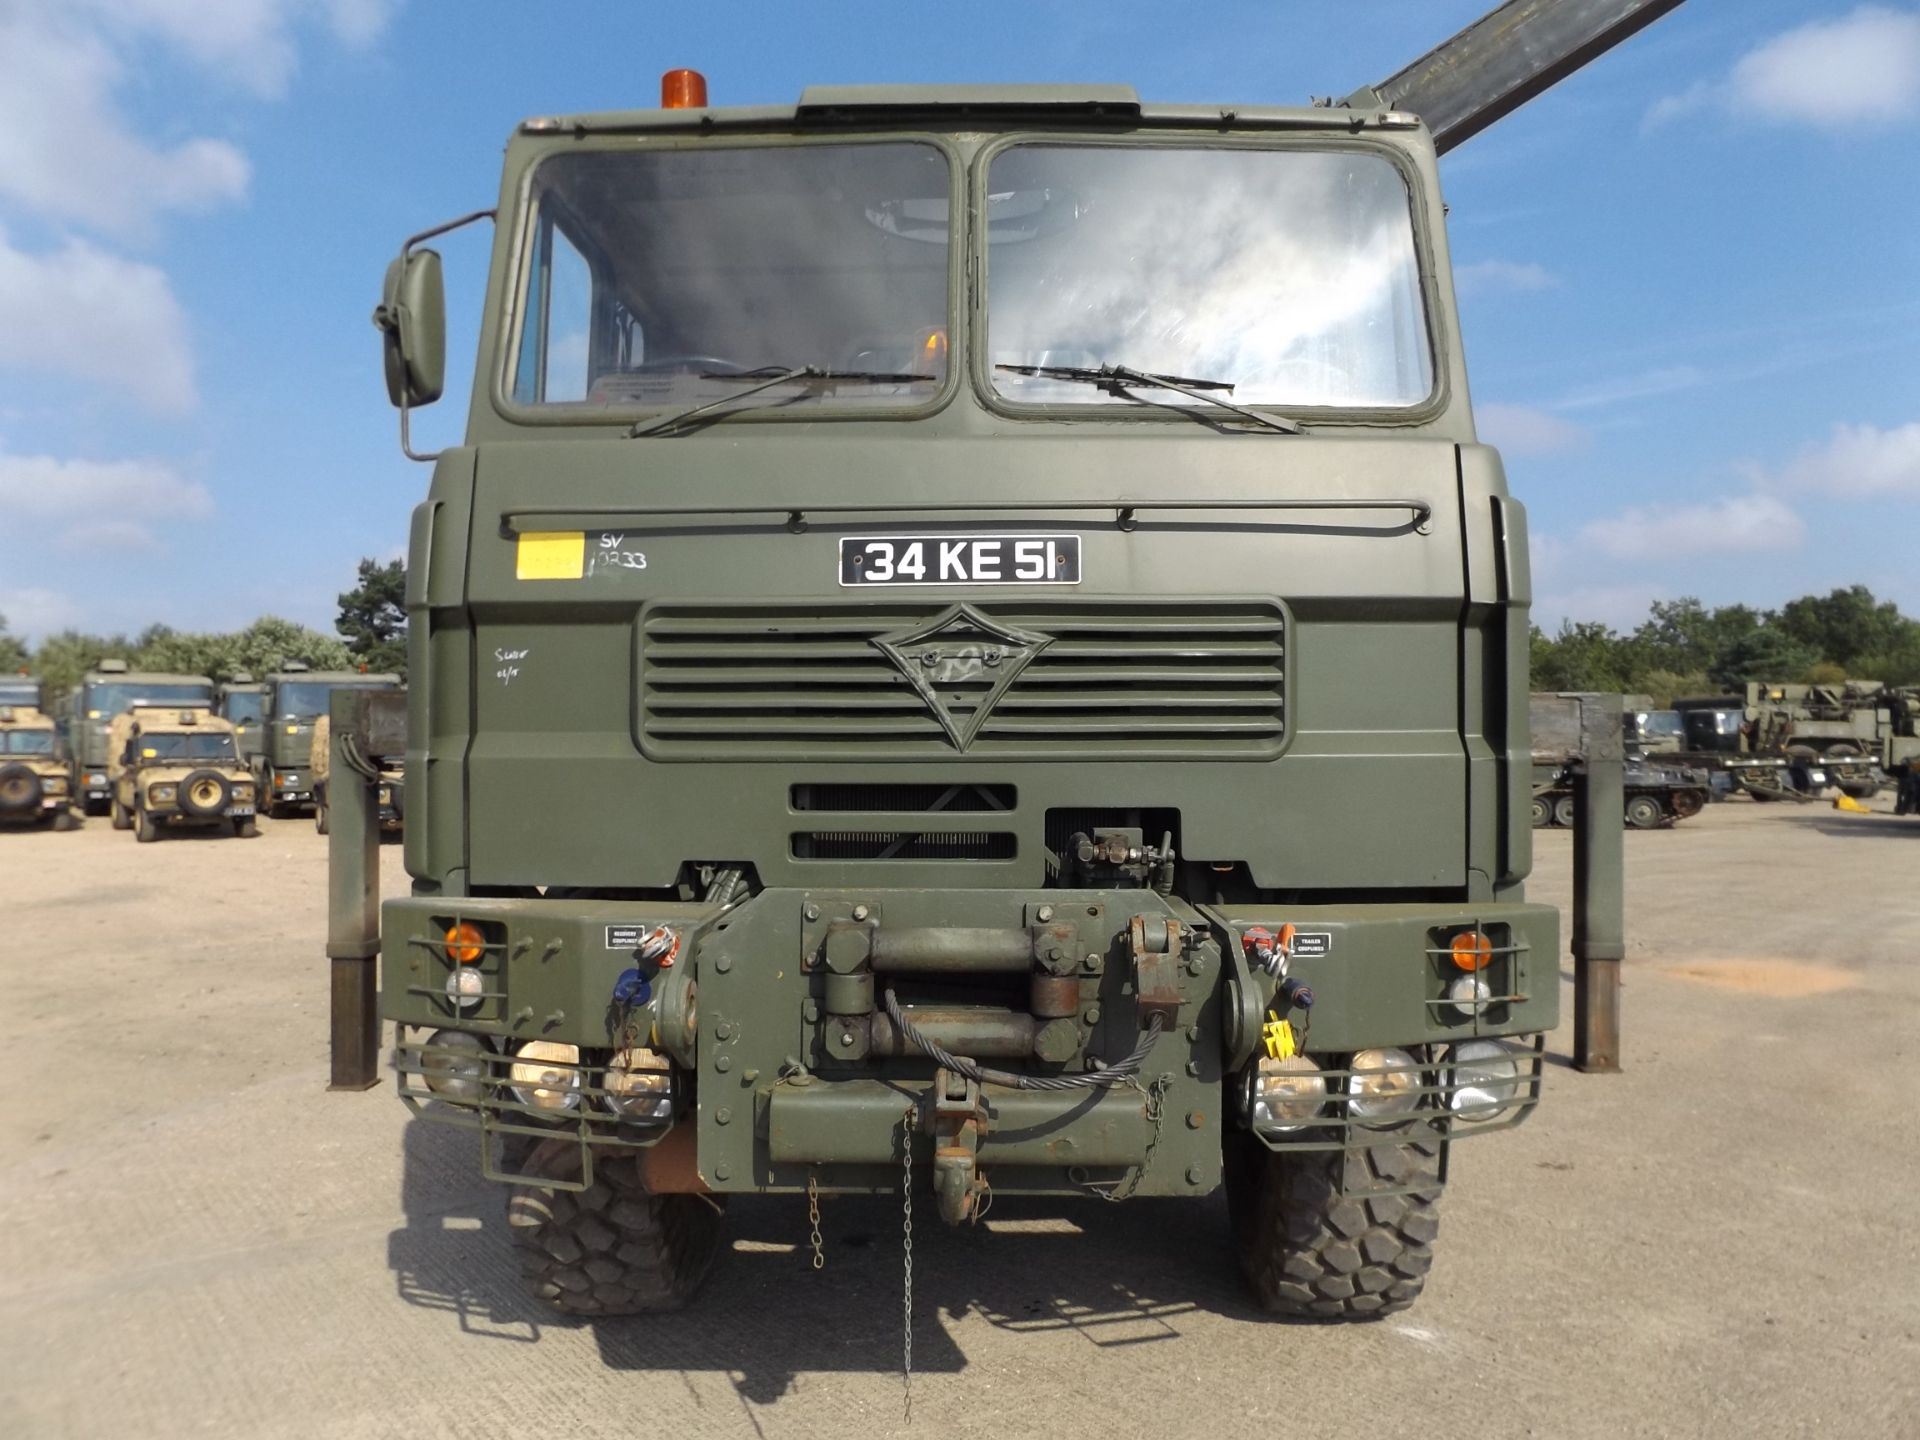 Foden 6x6 Recovery Vehicle which is Complete with Remotes and EKA Recovery Tools - Image 10 of 27